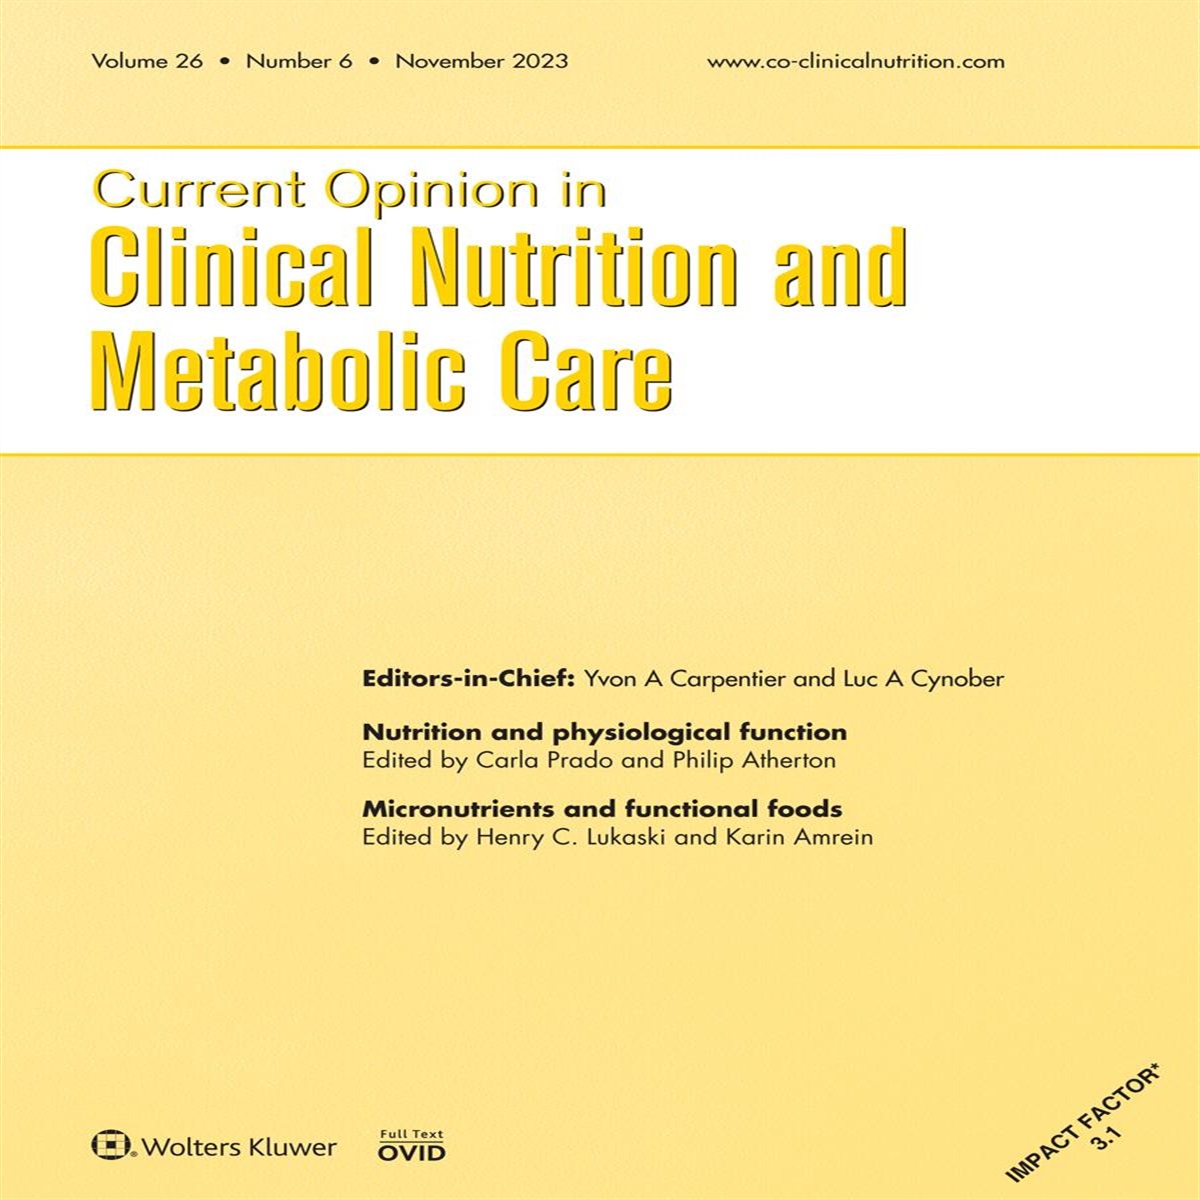 Editorial: harnessing nutritional and technological interventions for optimal health outcomes